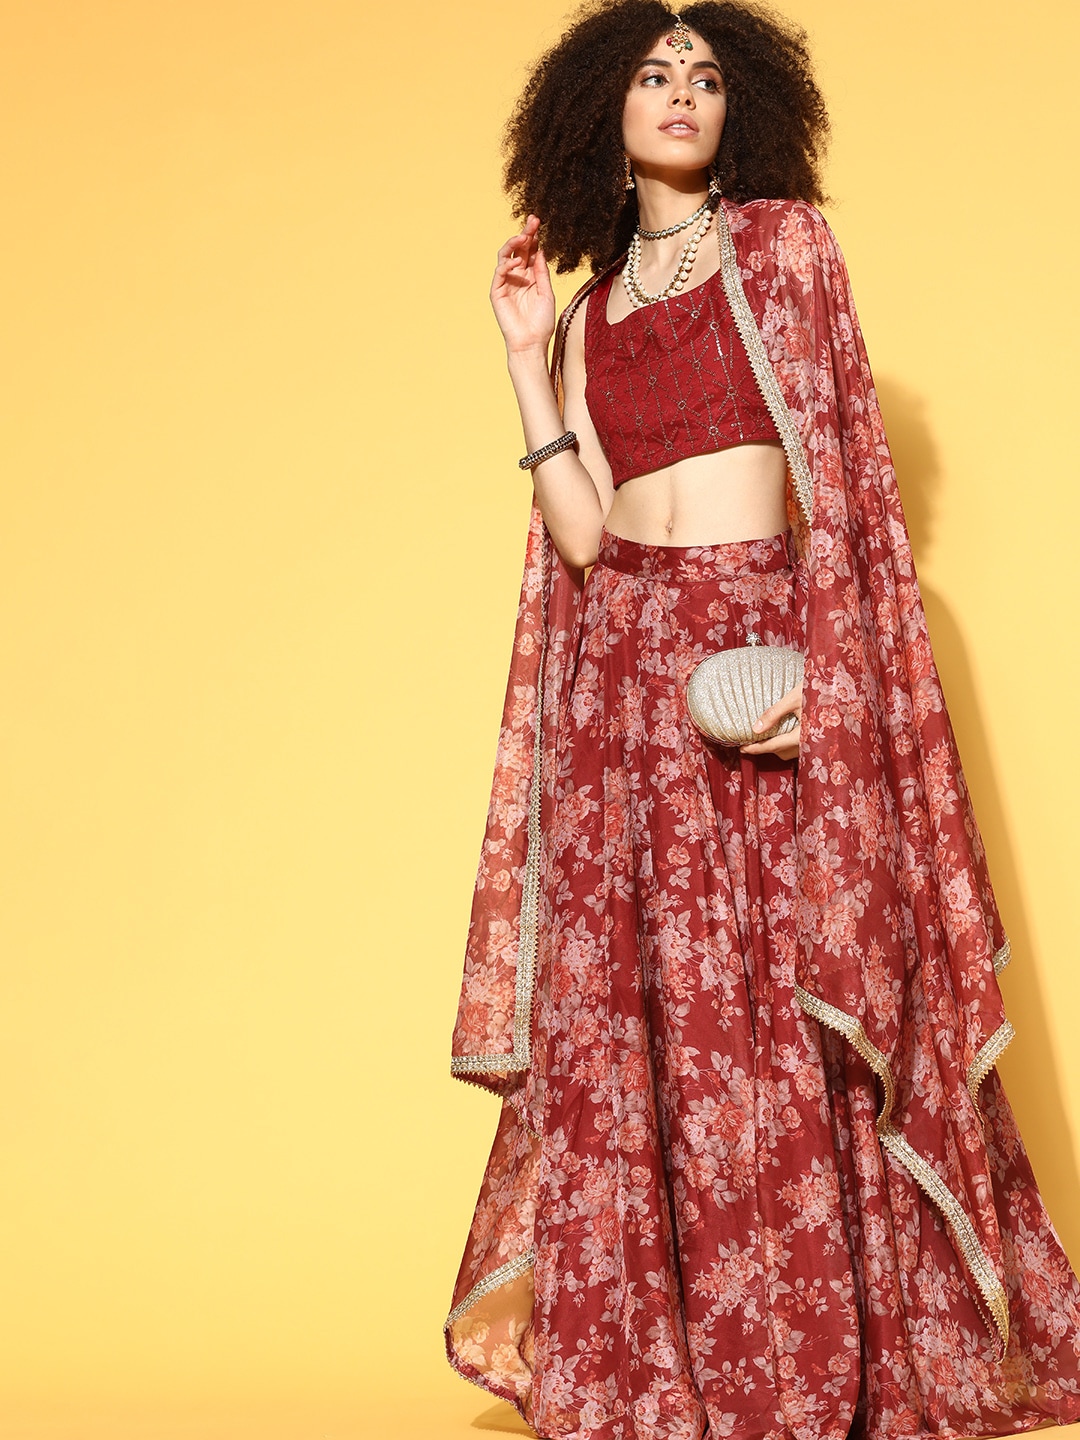 Inddus Gorgeous Red Embroidered Semi-Stitched Lehenga Choli with Dupatta Price in India